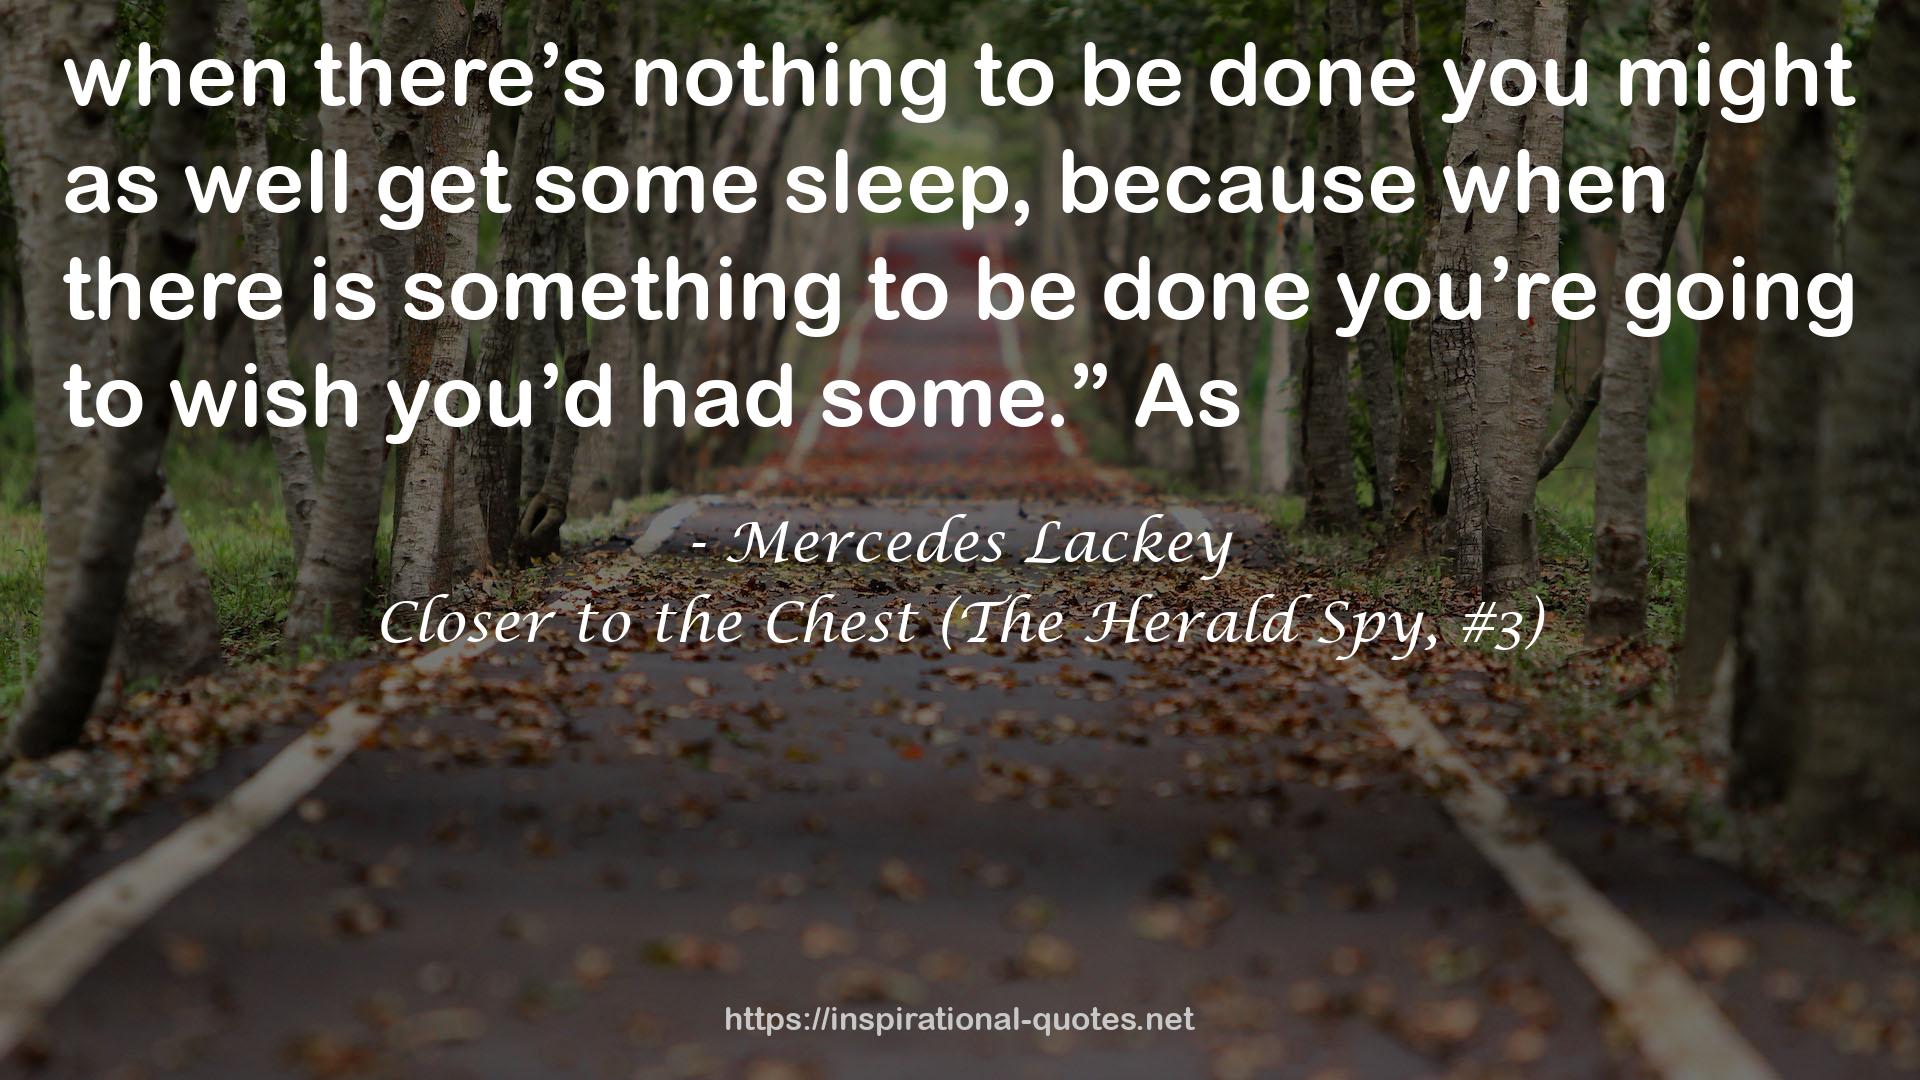 Closer to the Chest (The Herald Spy, #3) QUOTES